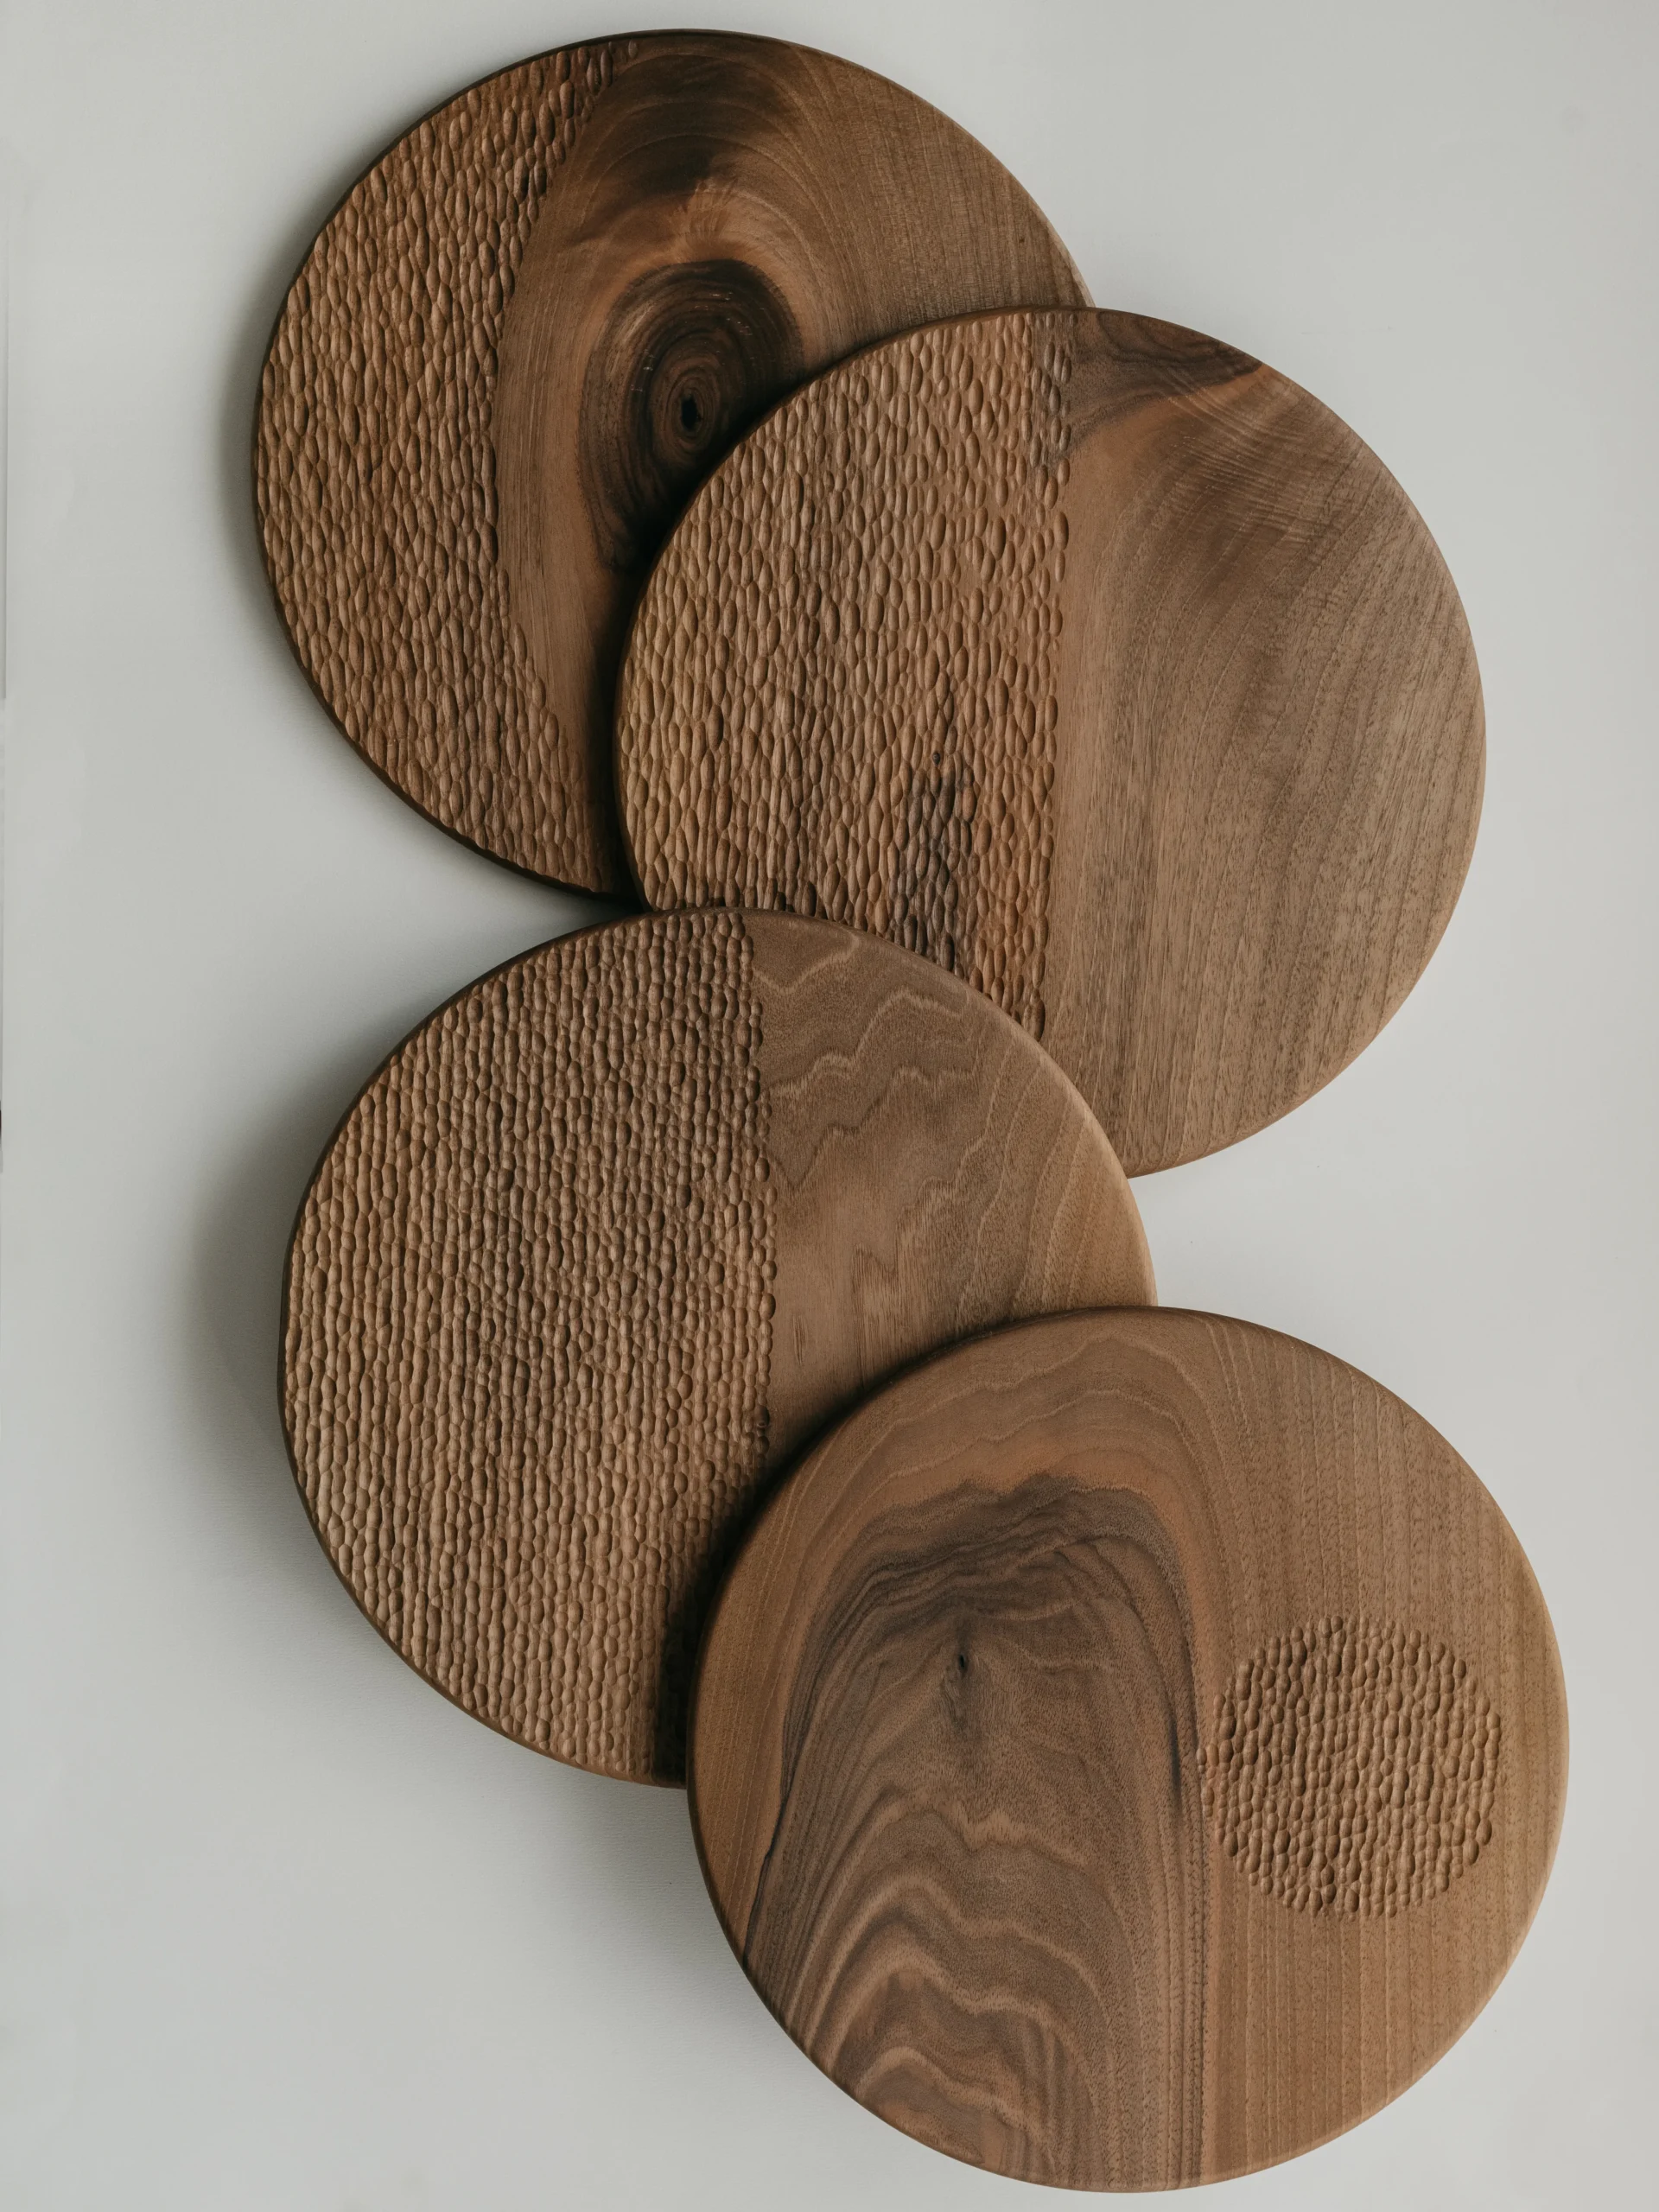 The Moon is a collection of four wooden serving boards made of selected walnut wood. Each plate has a different pattern presenting the phases of the moon.